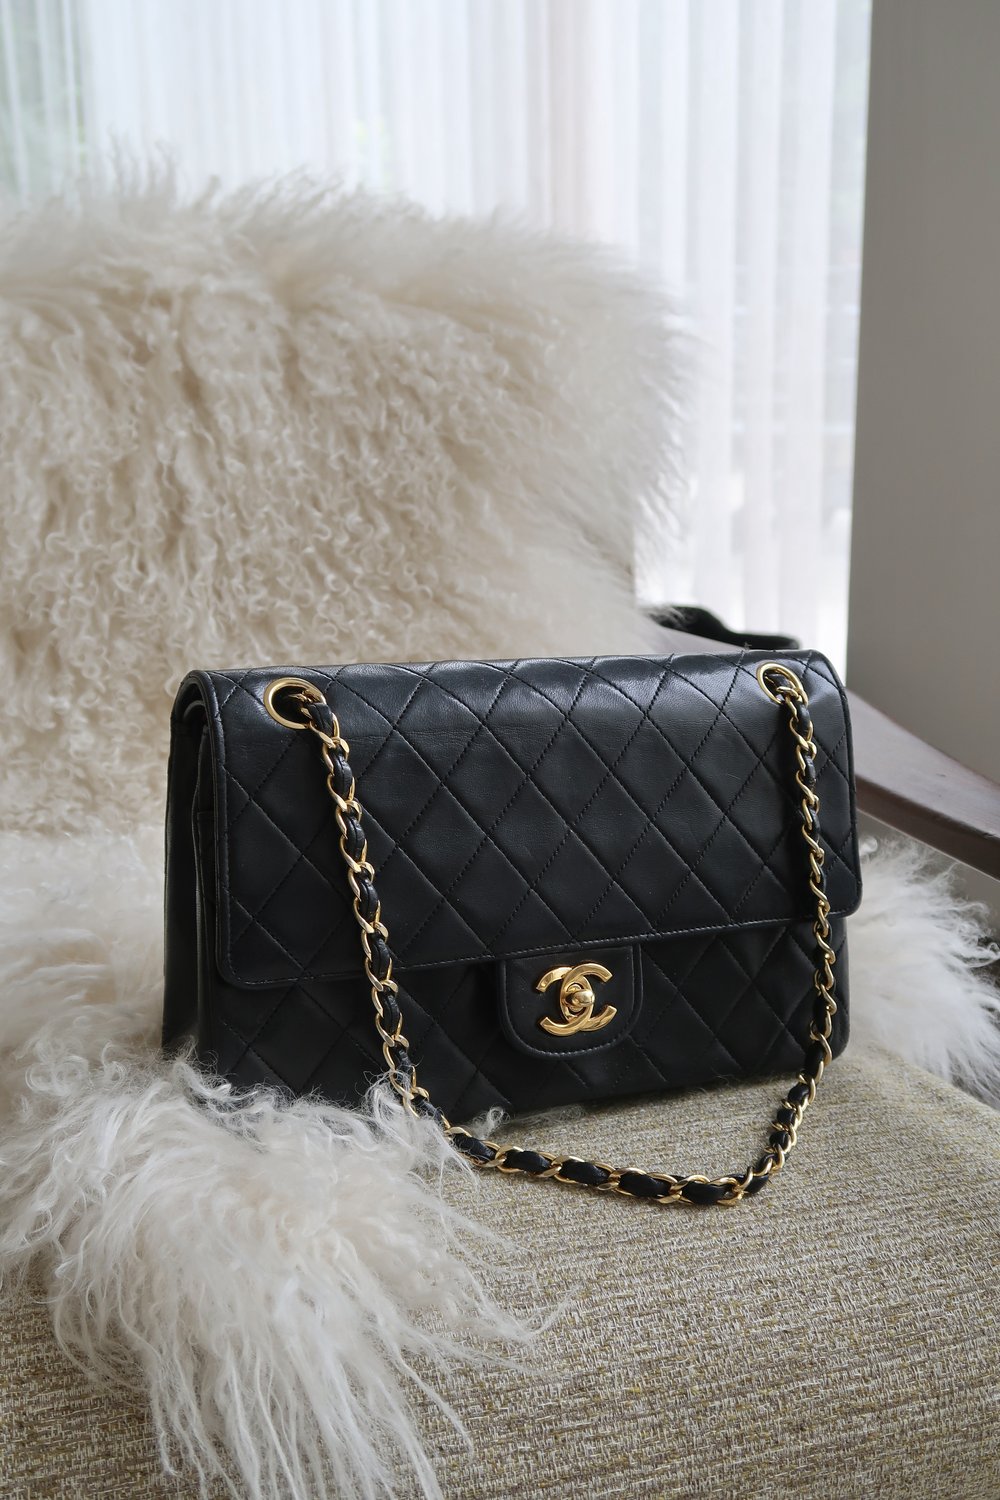 Chanel Boy Bag Review - Is It Worth The Investment?